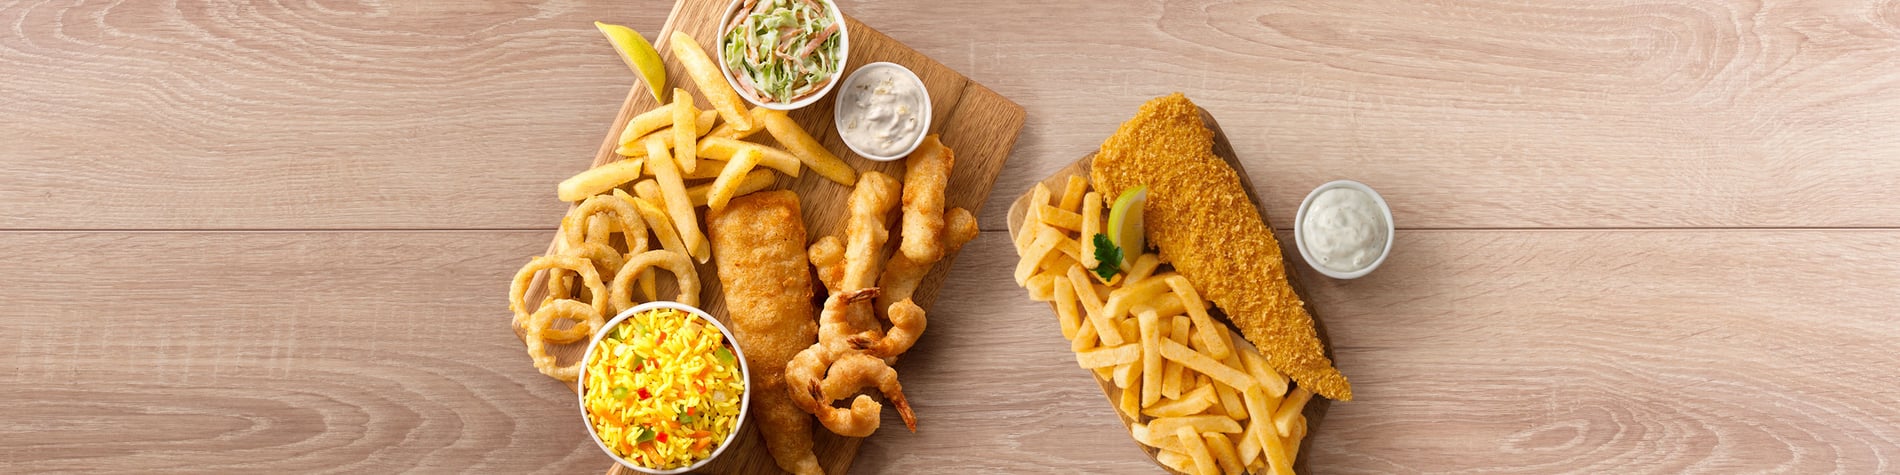 Seafood meals from Fishaways Sibaya Casino including a Crunchy Fish and Chips meal and a seafood Platter for One with hake, calamari, prawns, chips, onion rings, and coleslaw.